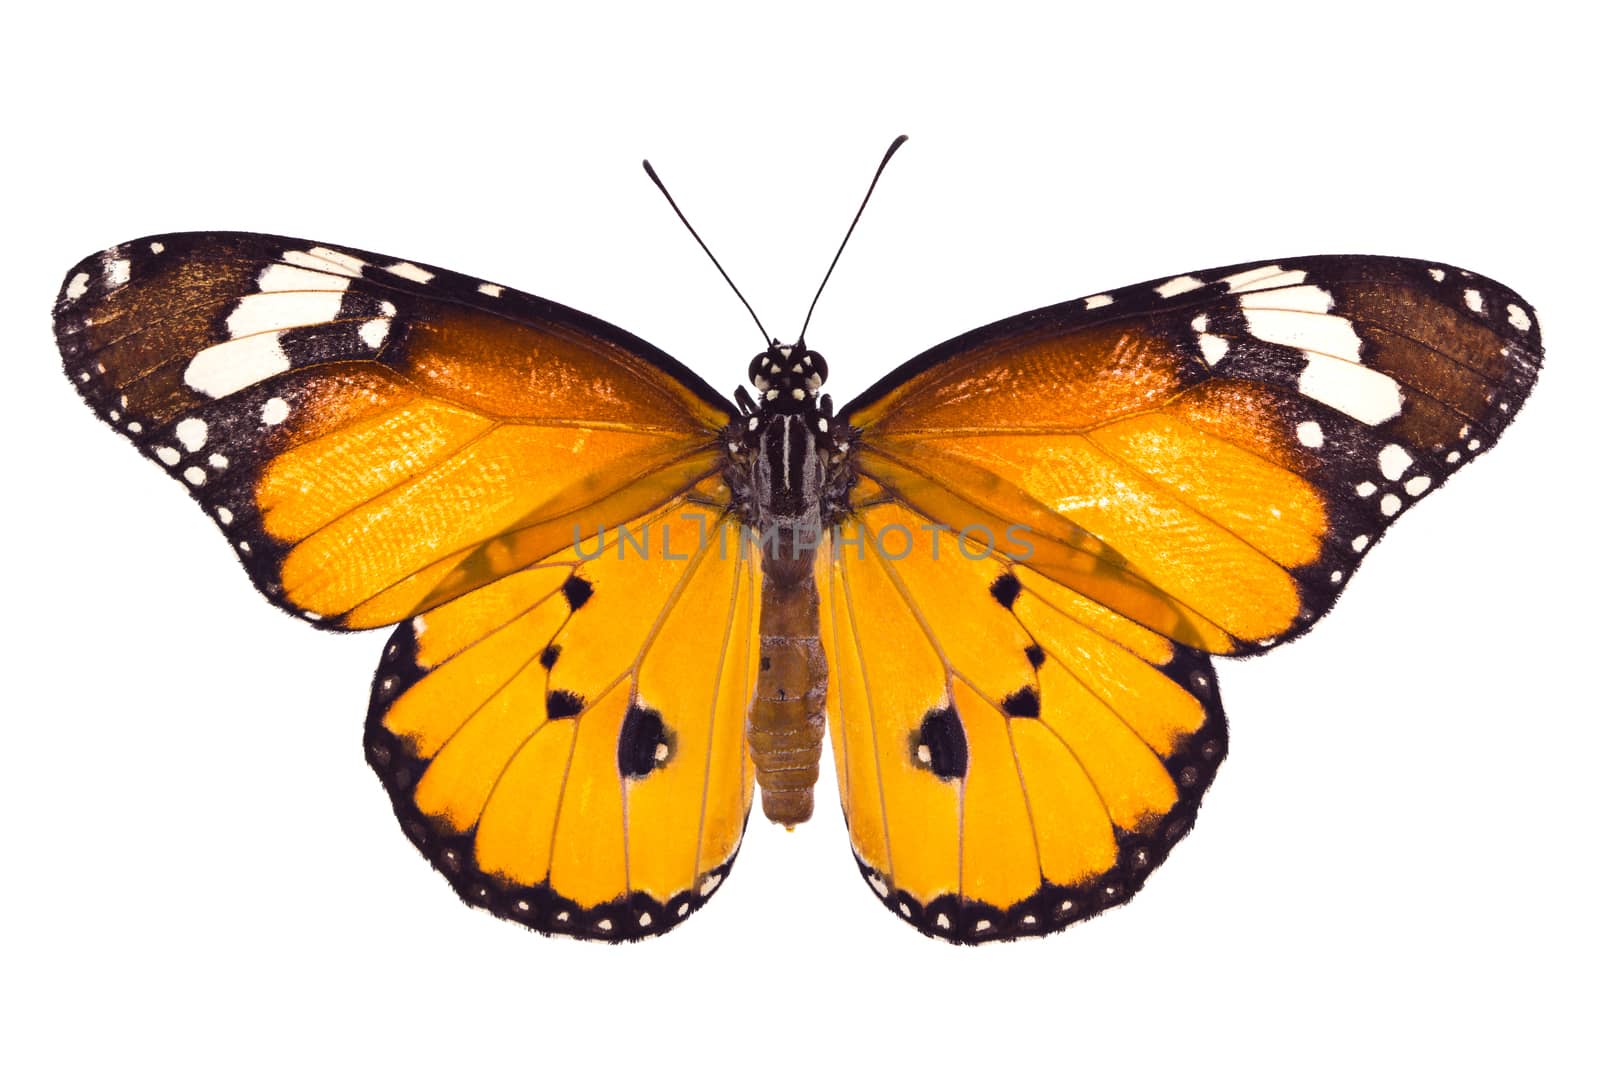 Monarch butterfly on white background, Clipping path